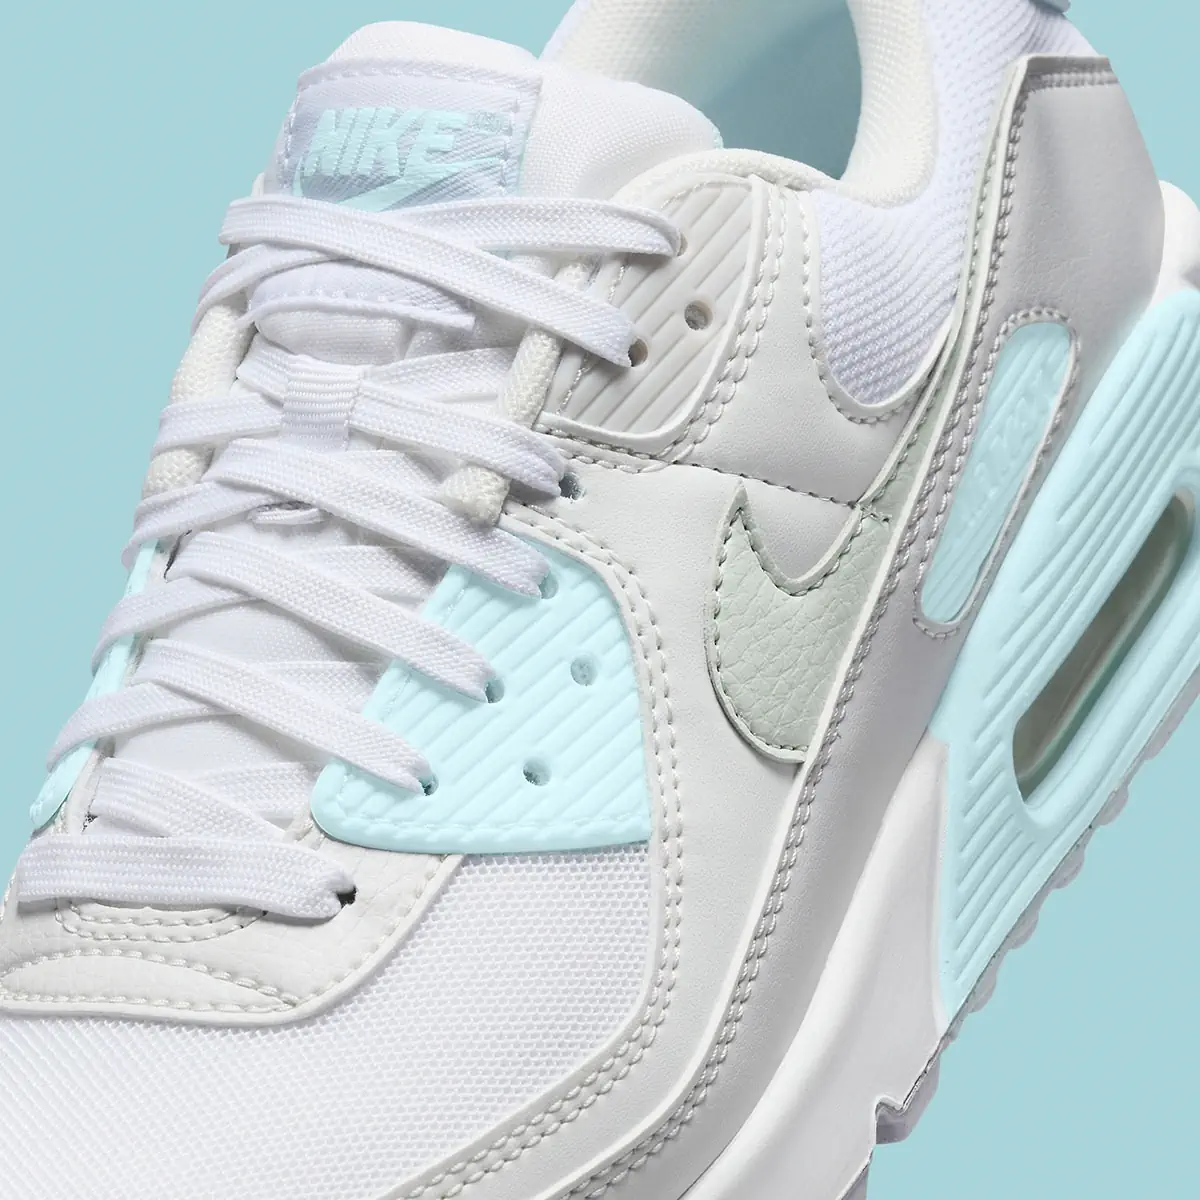 Nike Air Max 90 "Ice Blue" Chills with Arctic Accents